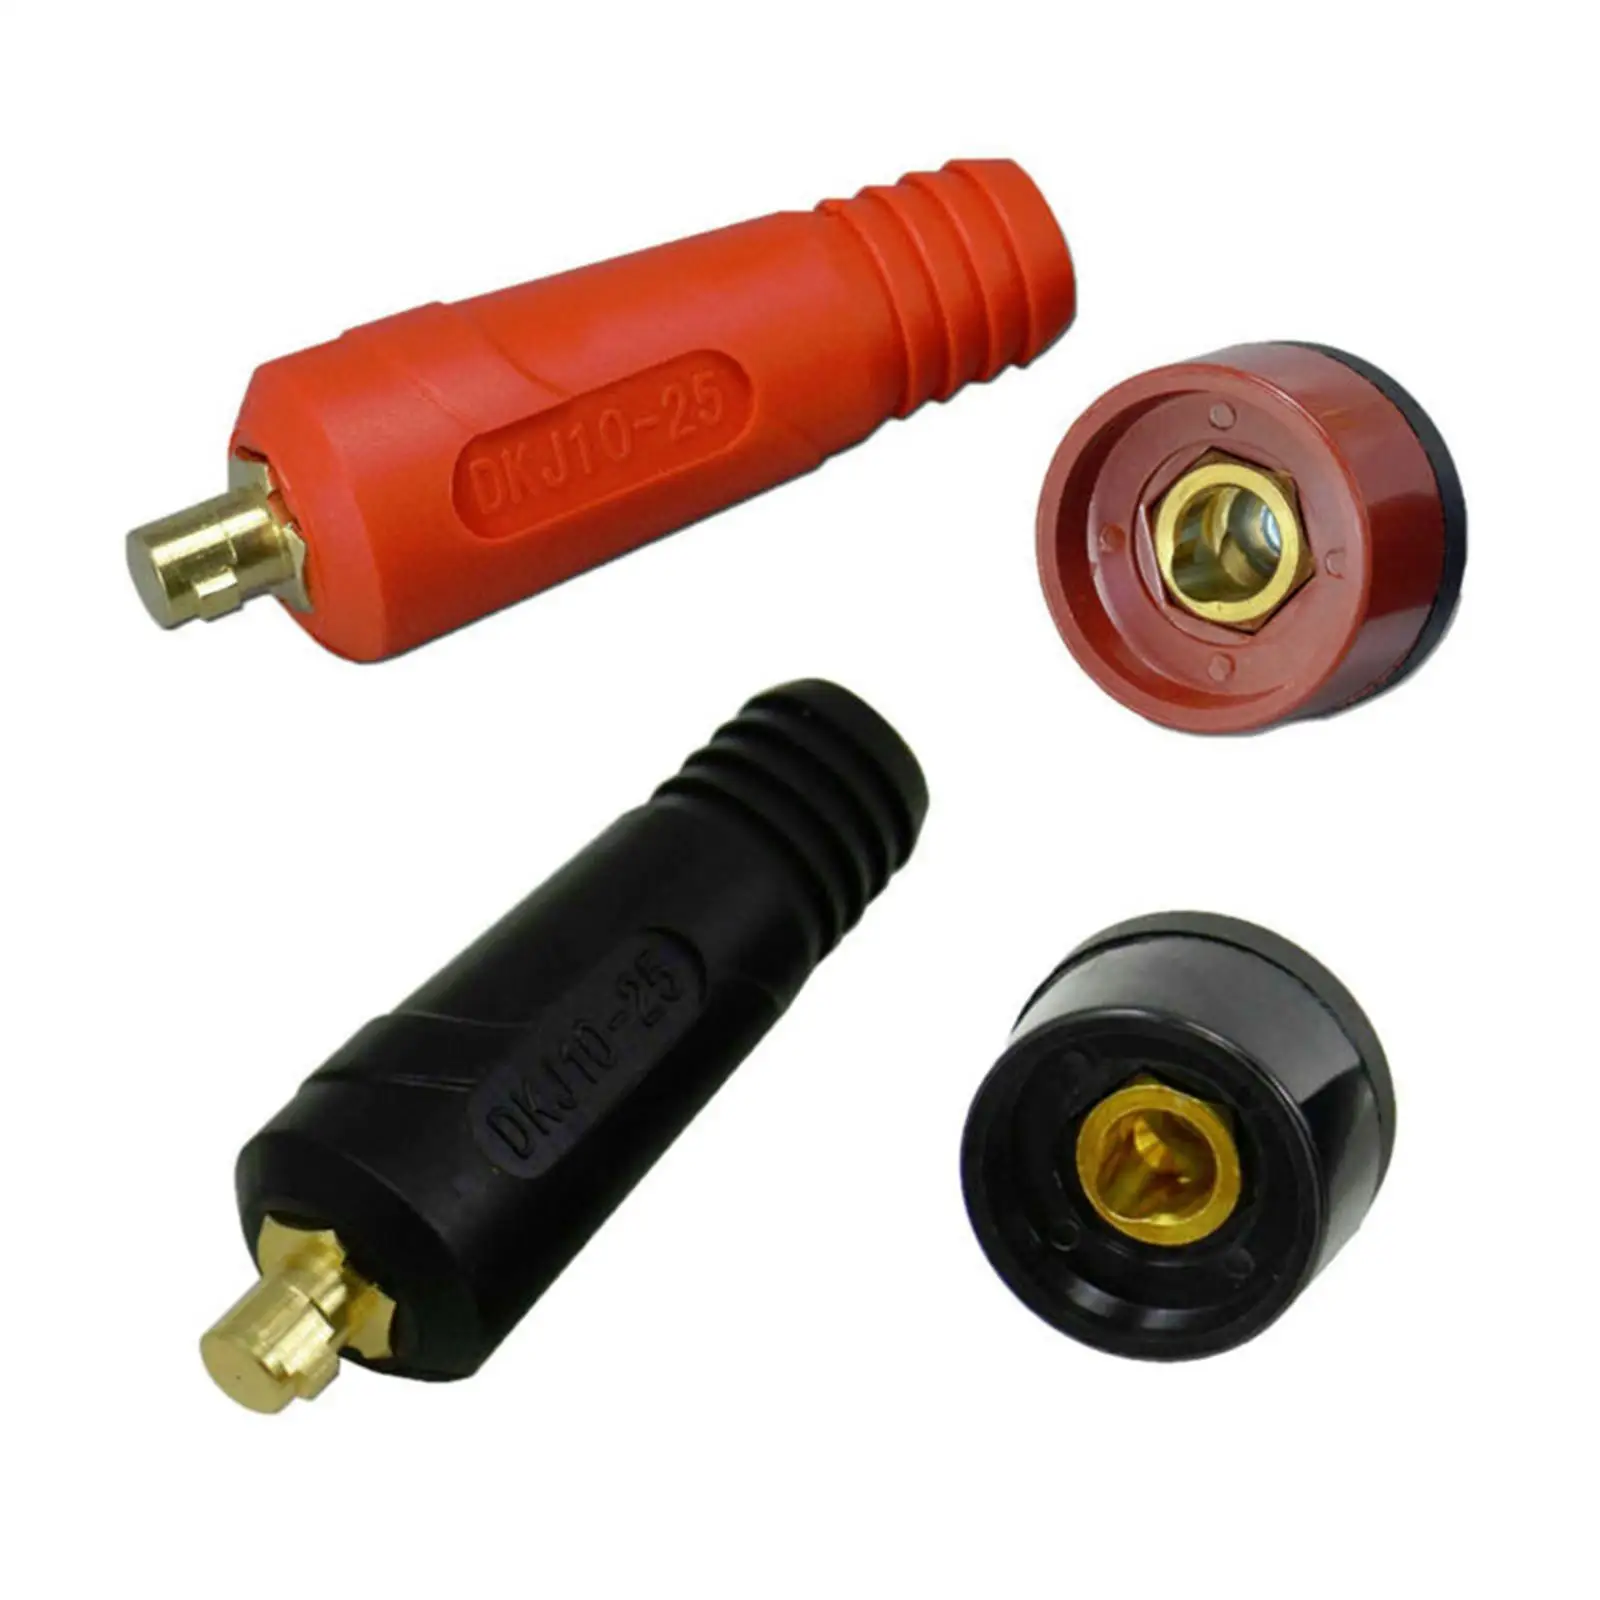 TIG Welding Cable Connector Plug and Socket Quick Connect Connector Welding